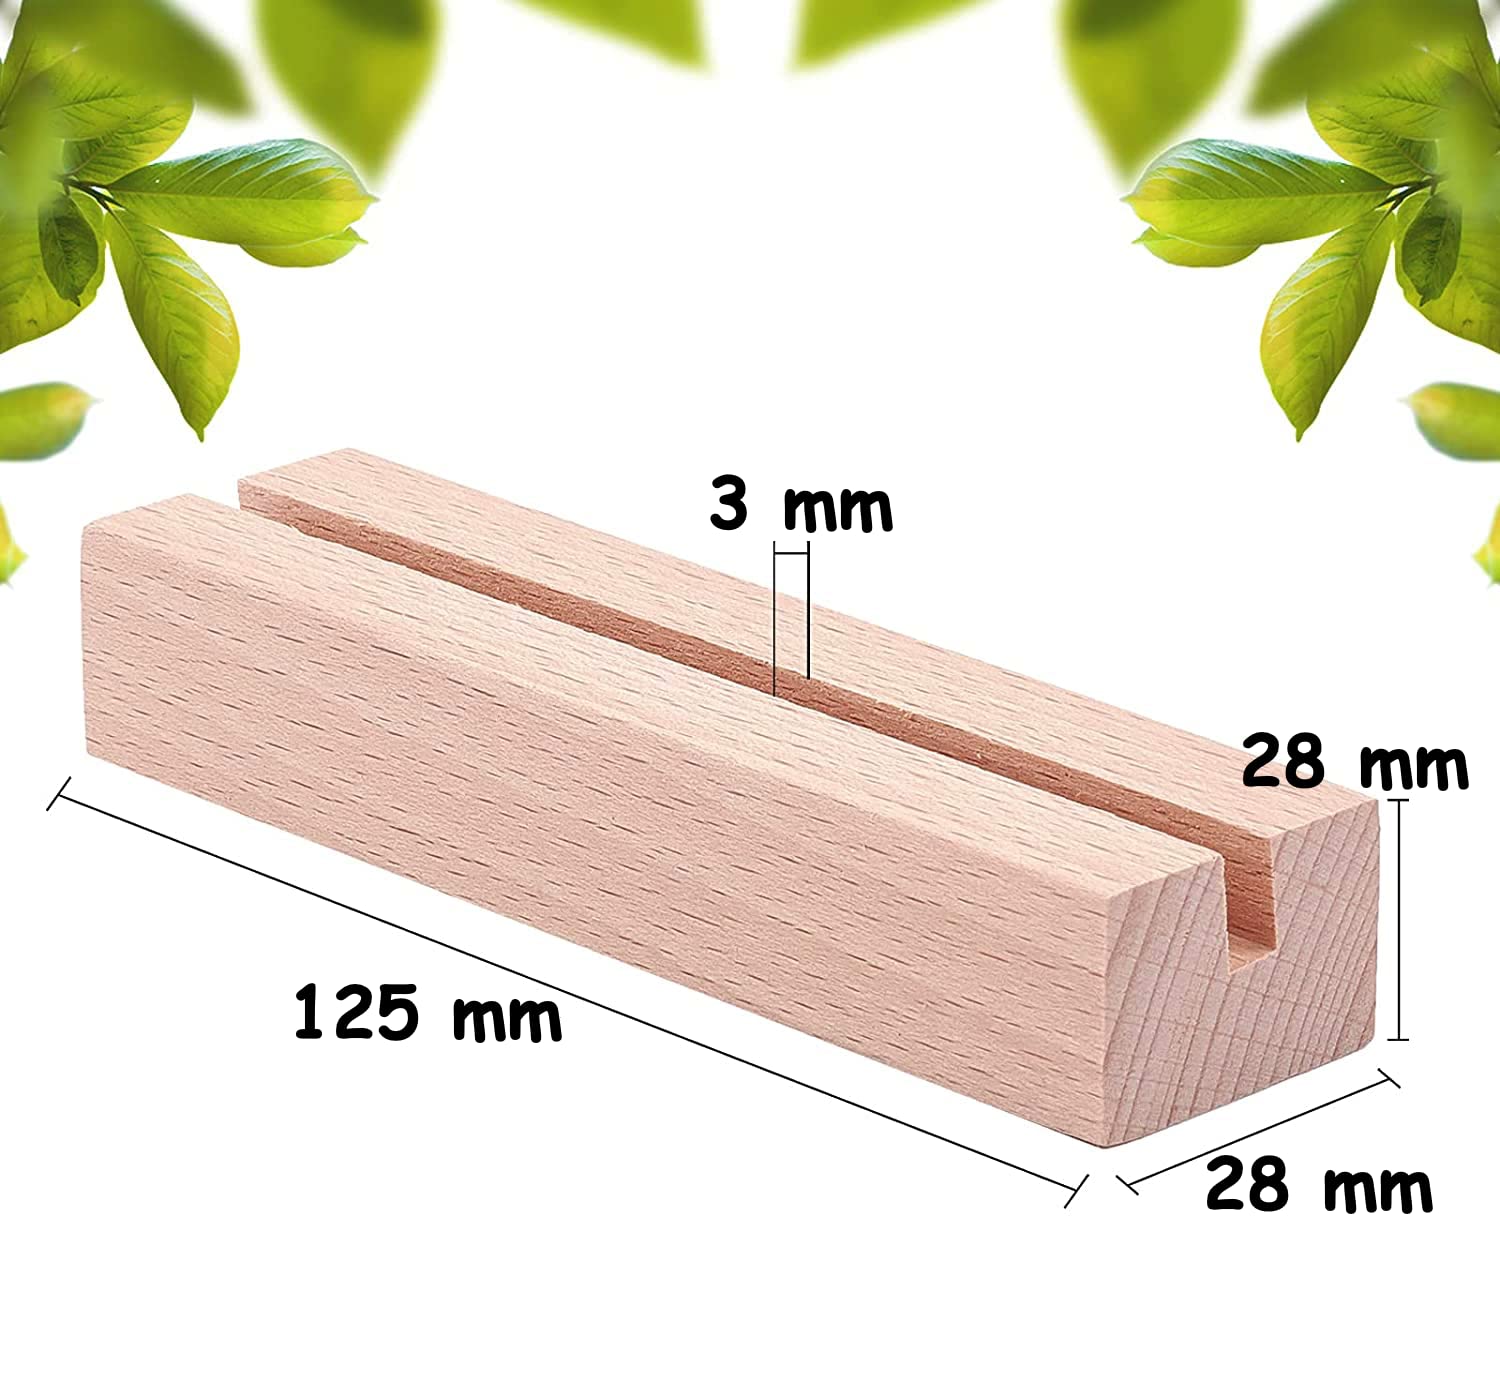 NJ Wood Card Holder Natural Beech Wood Table Number Holders, Wood Photo/Picture Holders, Conference Name Card Stand, Buffet menu Card Holder, Perfect for Hotel/Home Parties and conferences: 8 Pcs Set